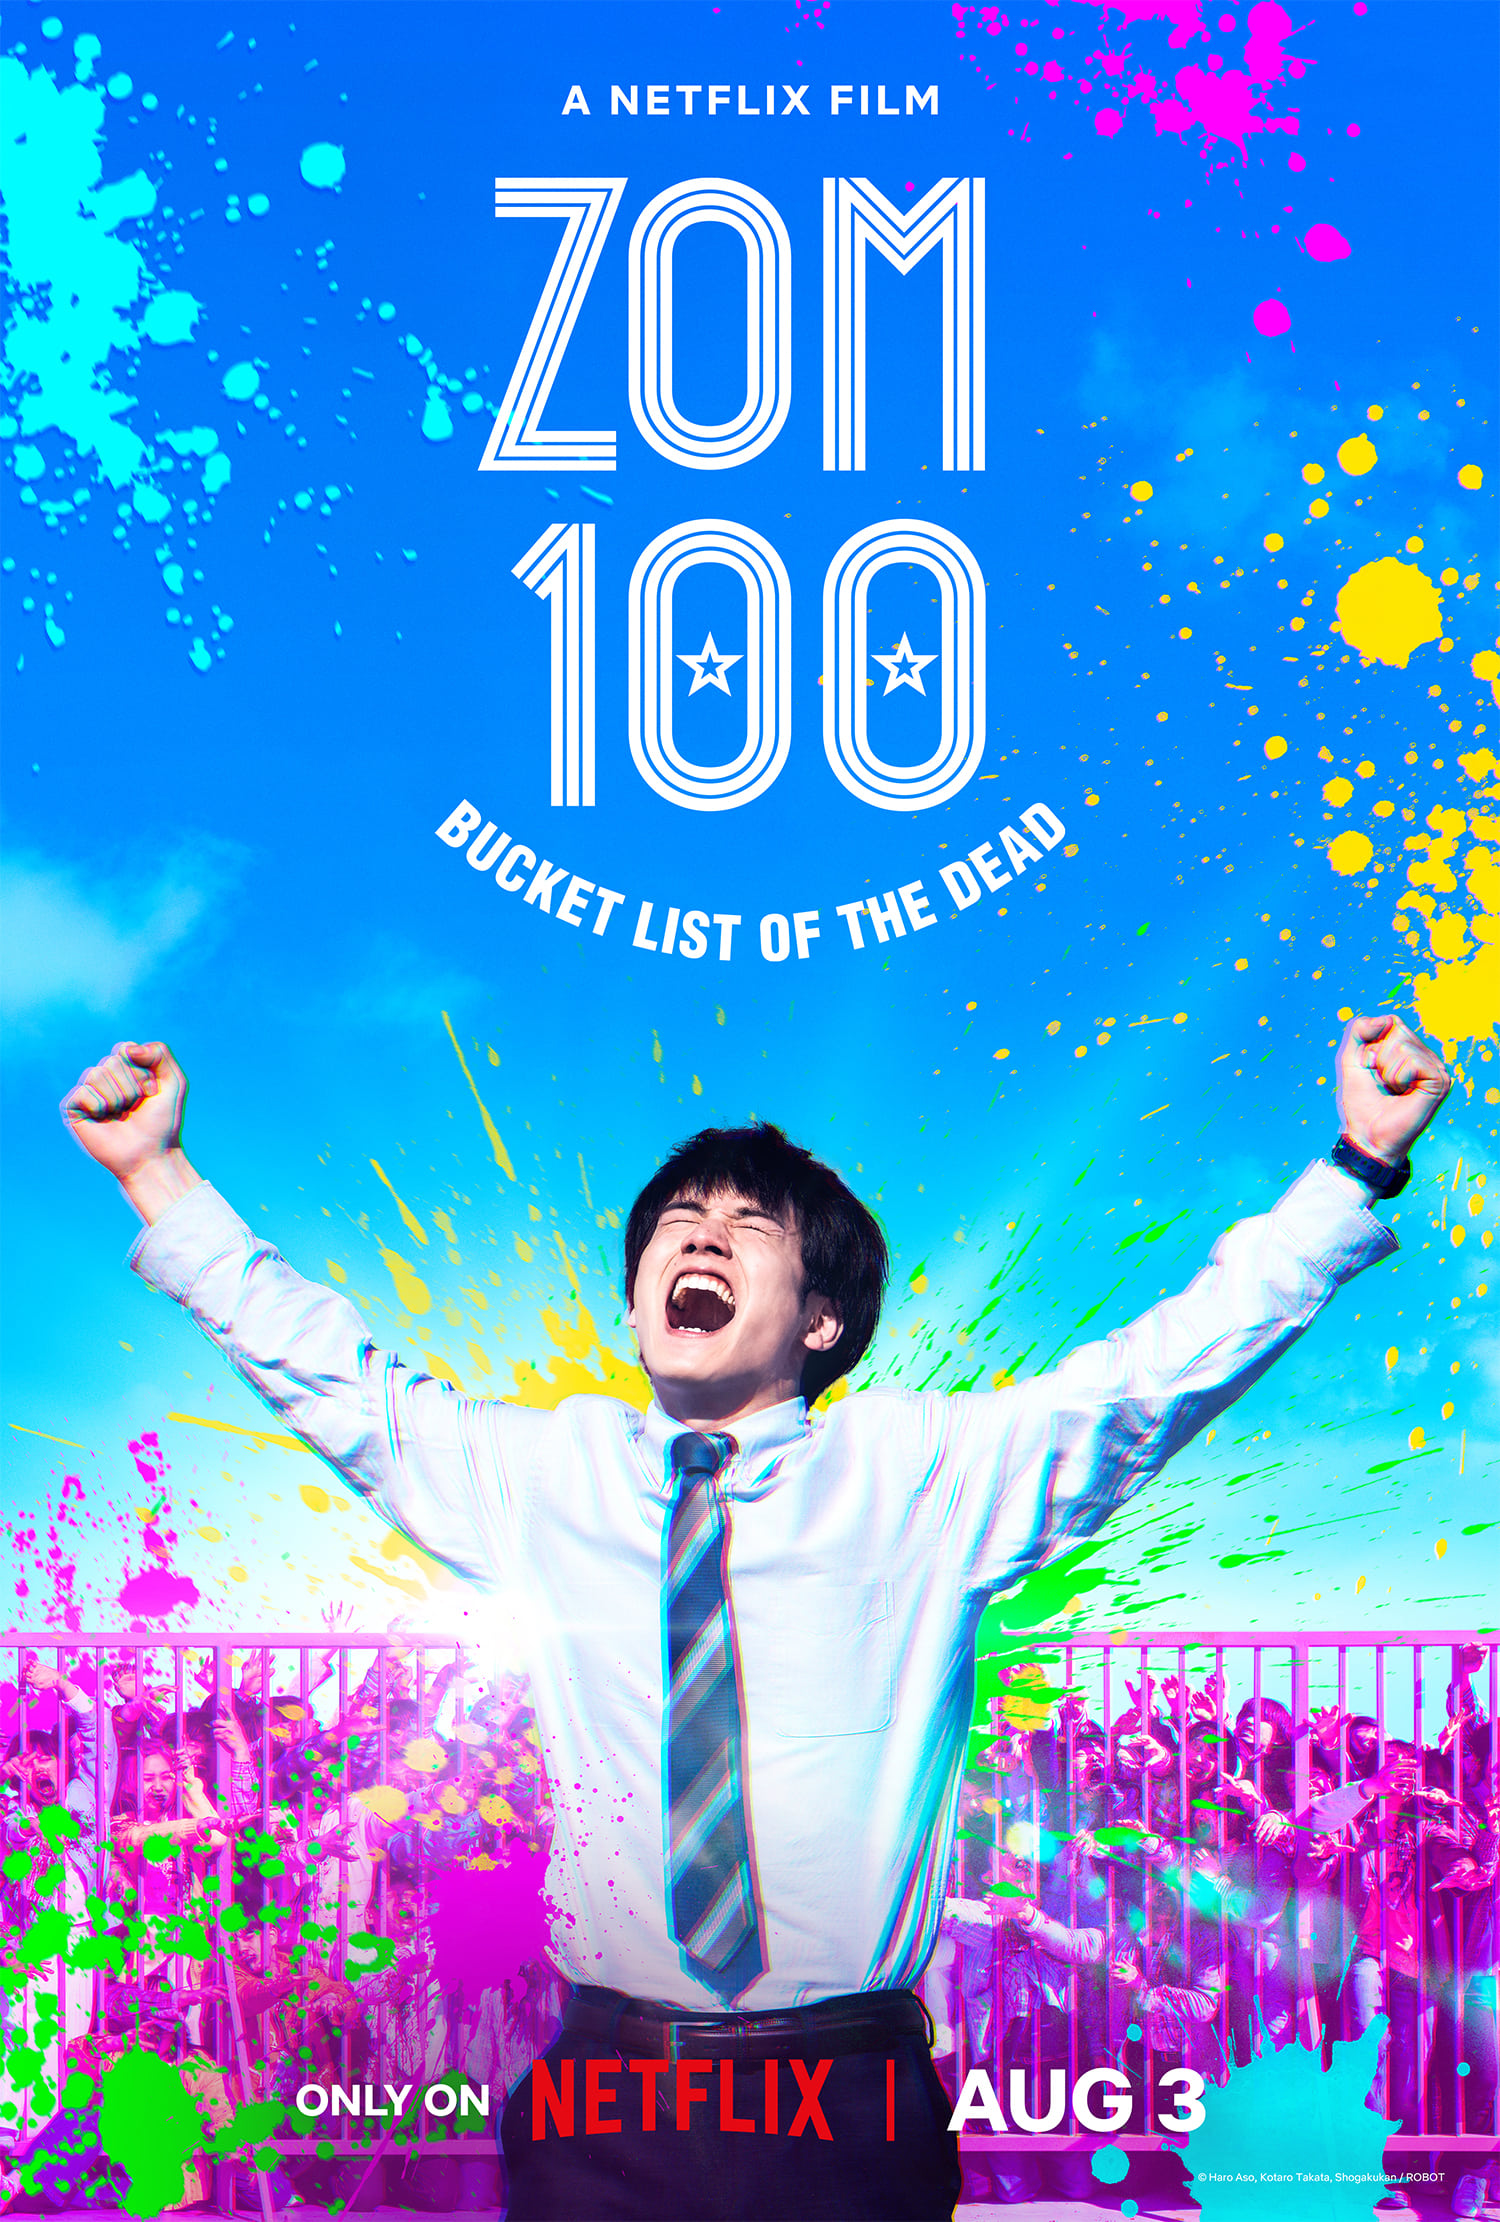 [WATCH 72+] Zom 100: Bucket List of the Dead (2023) FULL MOVIE ONLINE FREE ENGLISH/Dub/SUB Comedy STREAMINGS ������‍♂️ Movie Poster